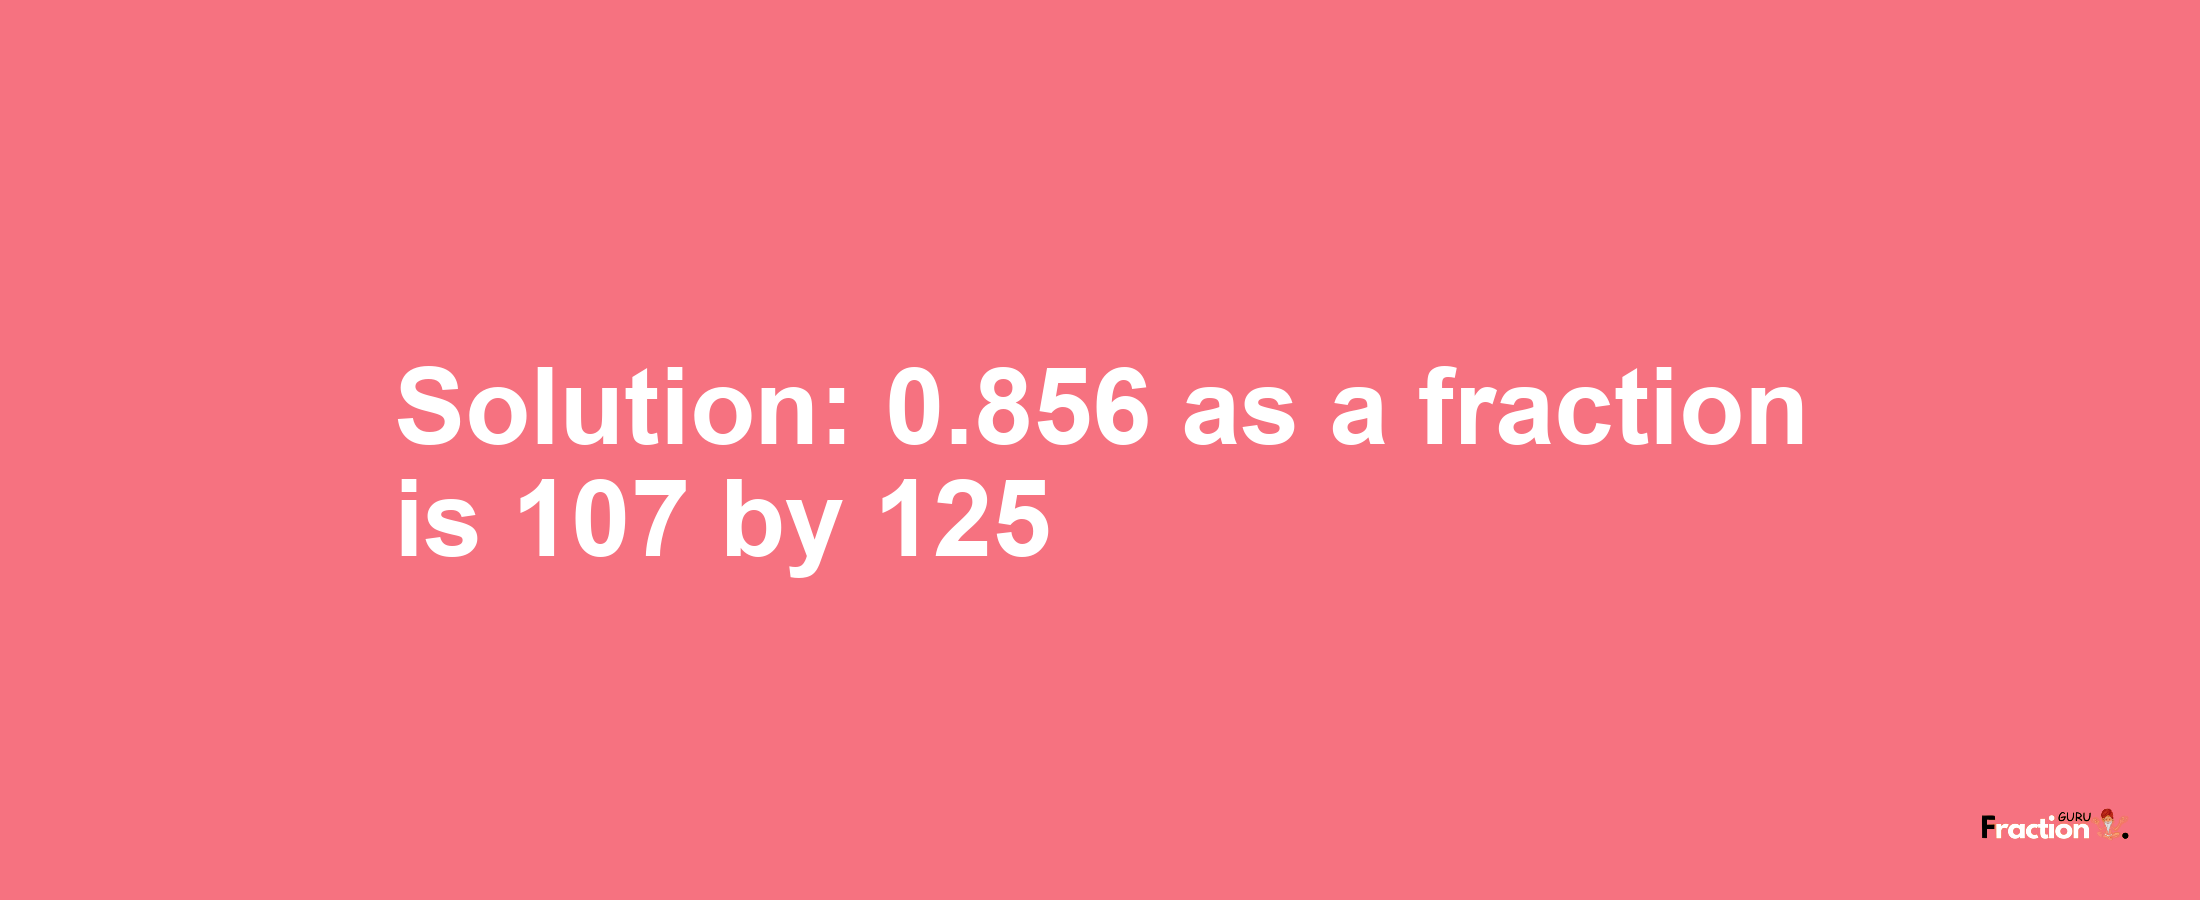 Solution:0.856 as a fraction is 107/125